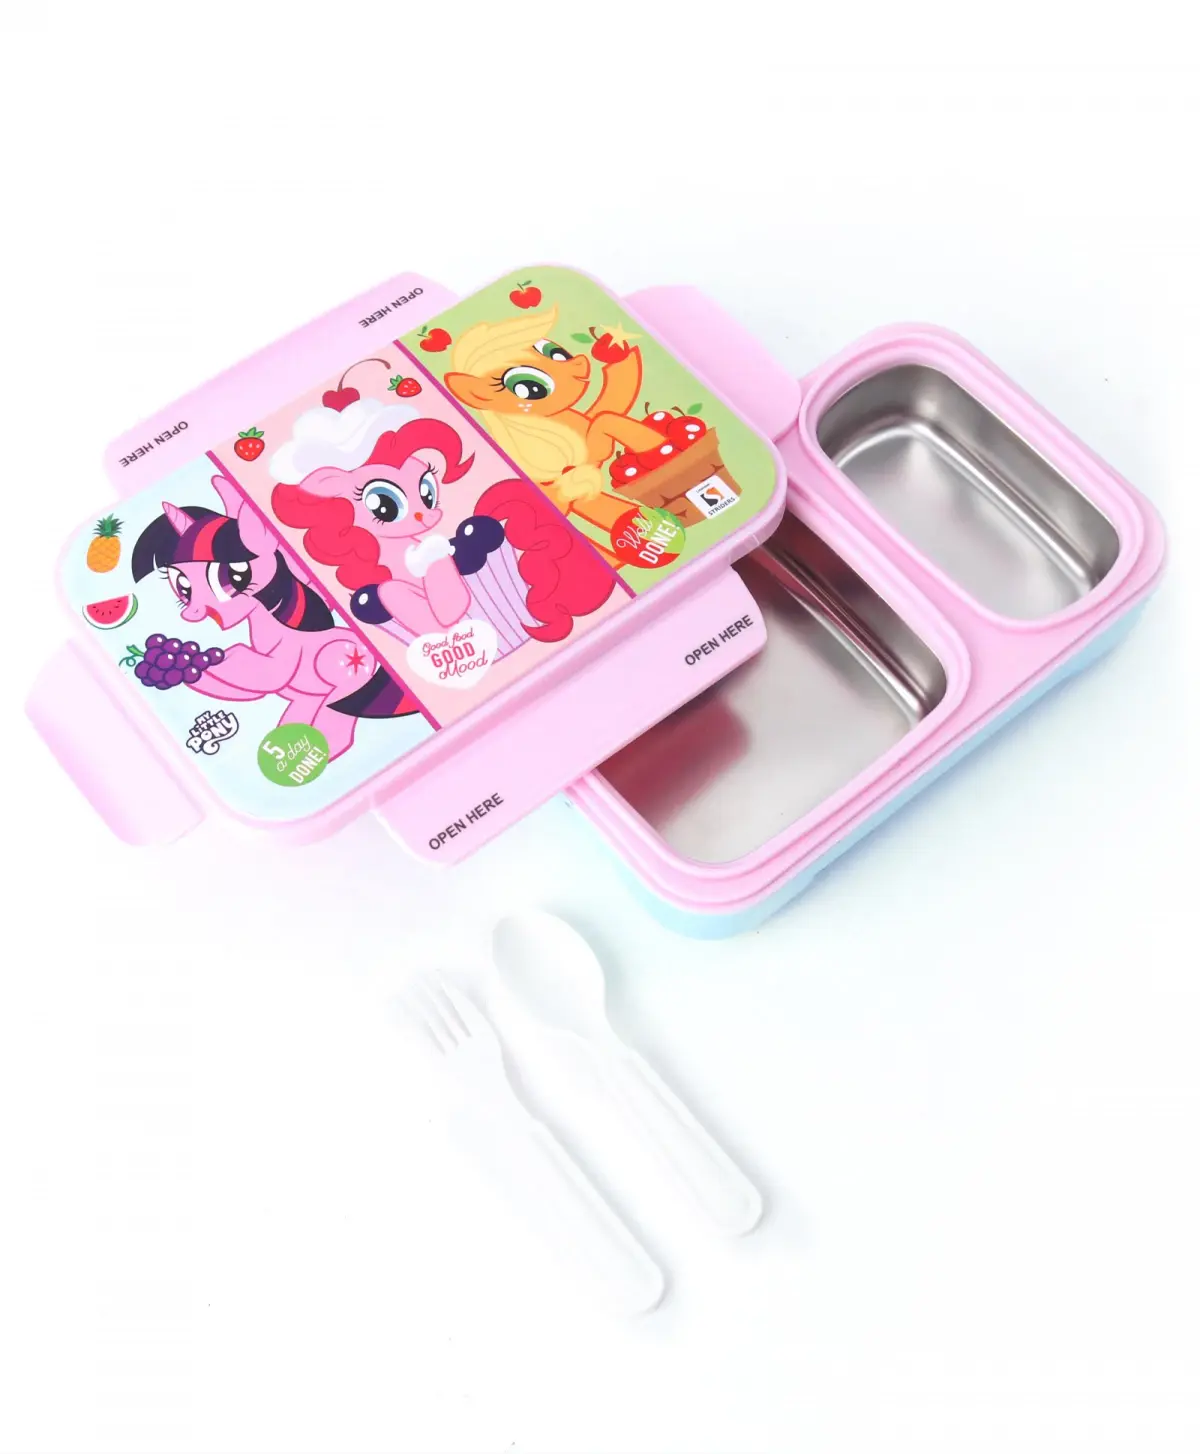 Striders My Little Pony Lunch Box, 3Y+, Multicolour